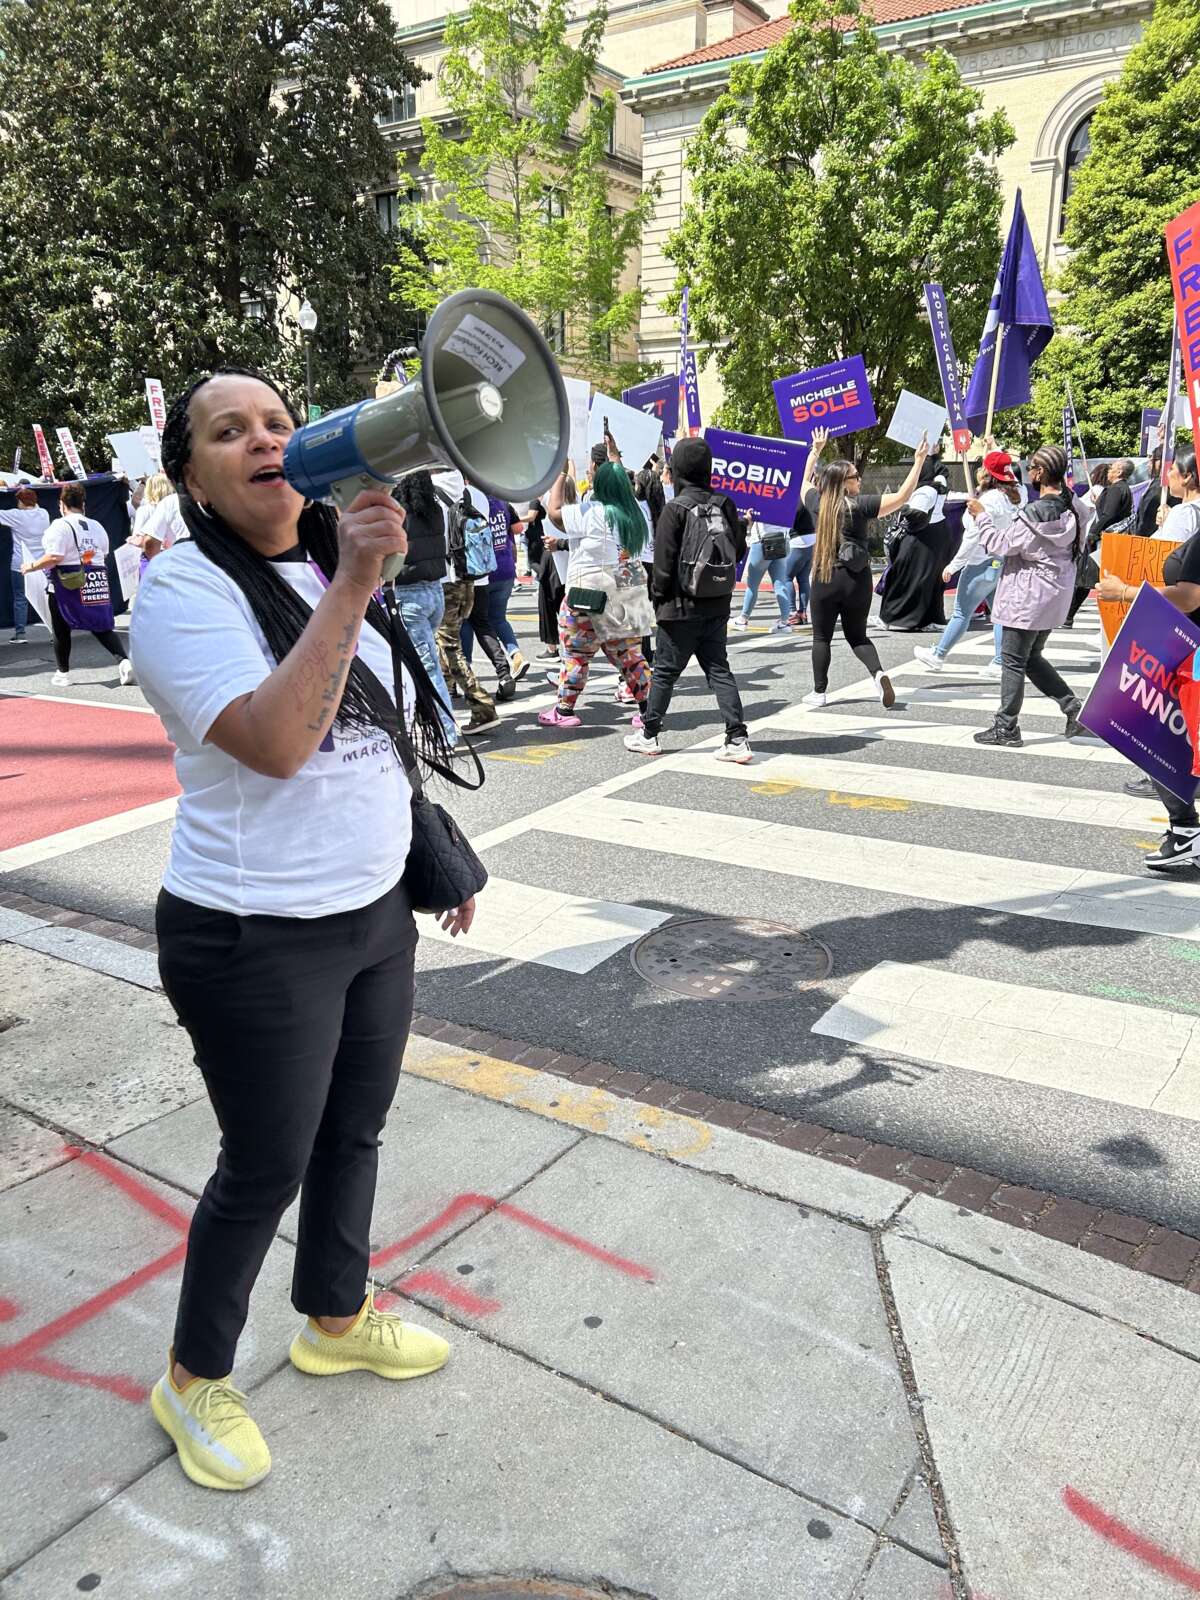 Andrea James, co-founder and director of the National Council for Incarcerated and Formerly Incarcerated Women and Girls, at the FreeHer march.